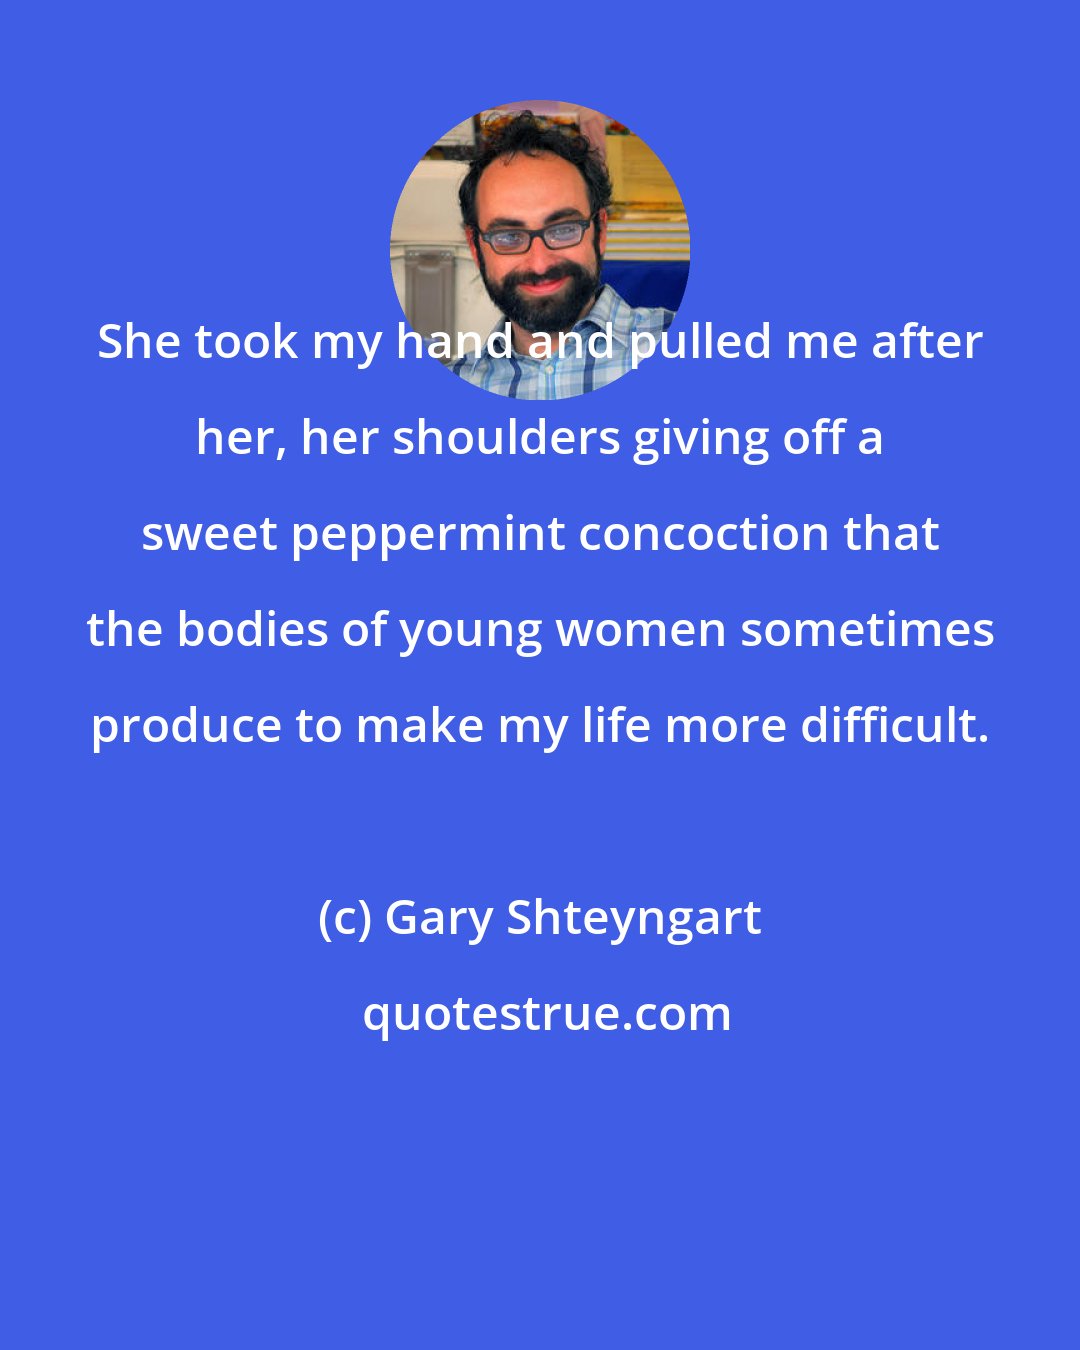 Gary Shteyngart: She took my hand and pulled me after her, her shoulders giving off a sweet peppermint concoction that the bodies of young women sometimes produce to make my life more difficult.